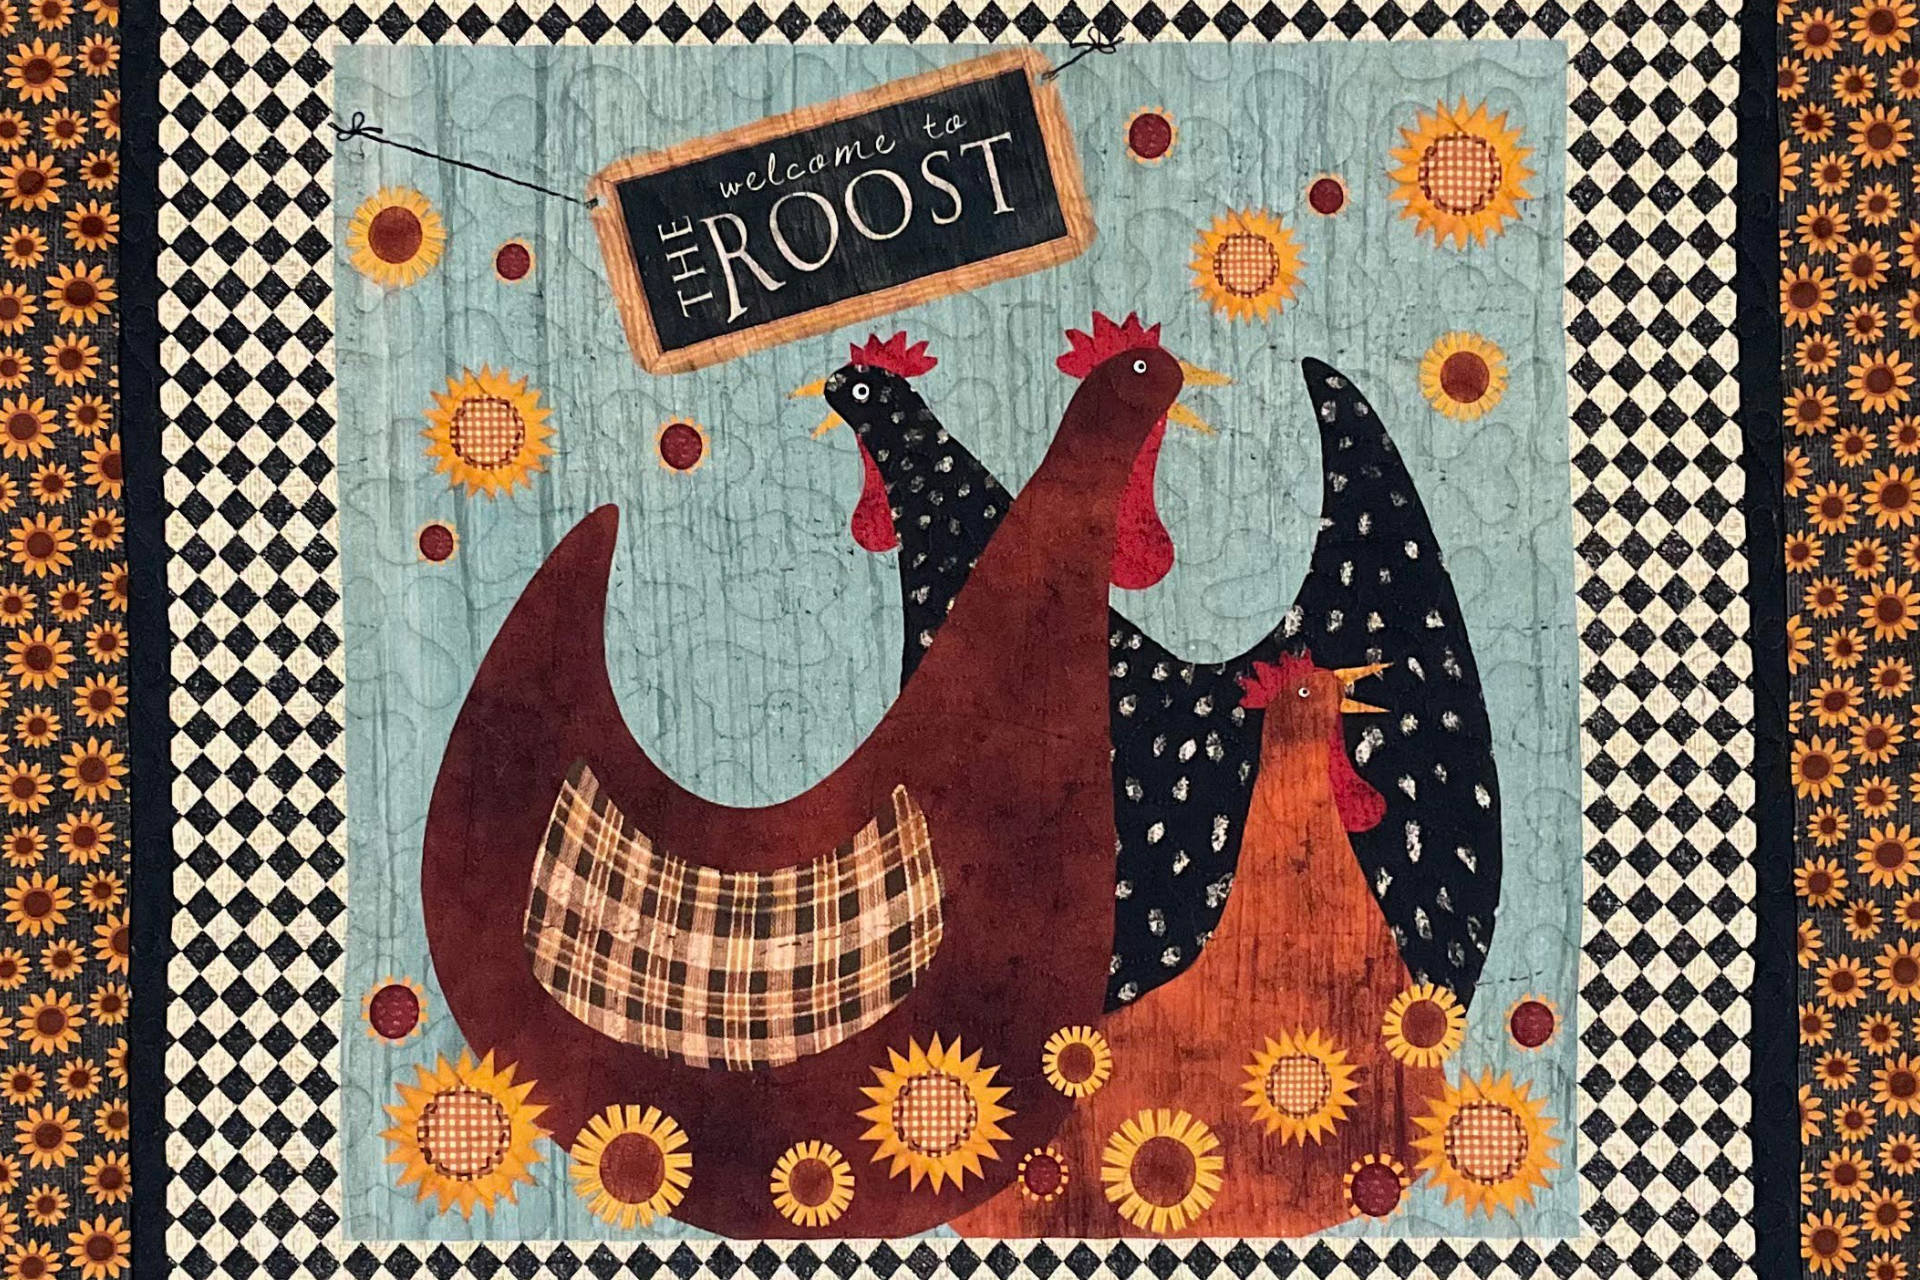 Welcome to the Roost